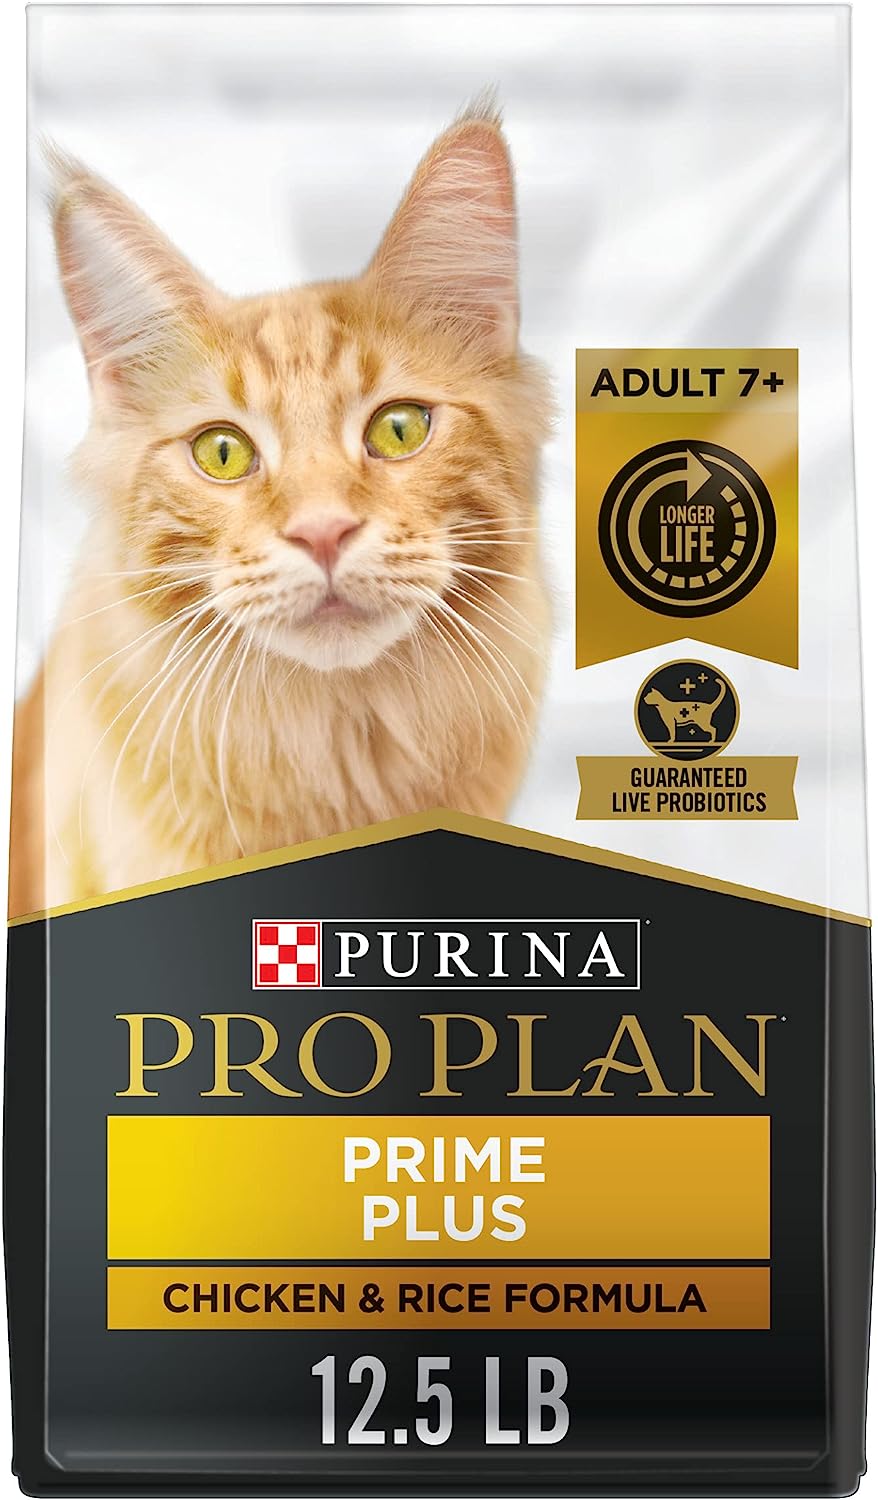 Purina Pro Plan Senior Cat Food With Probiotics for Cats